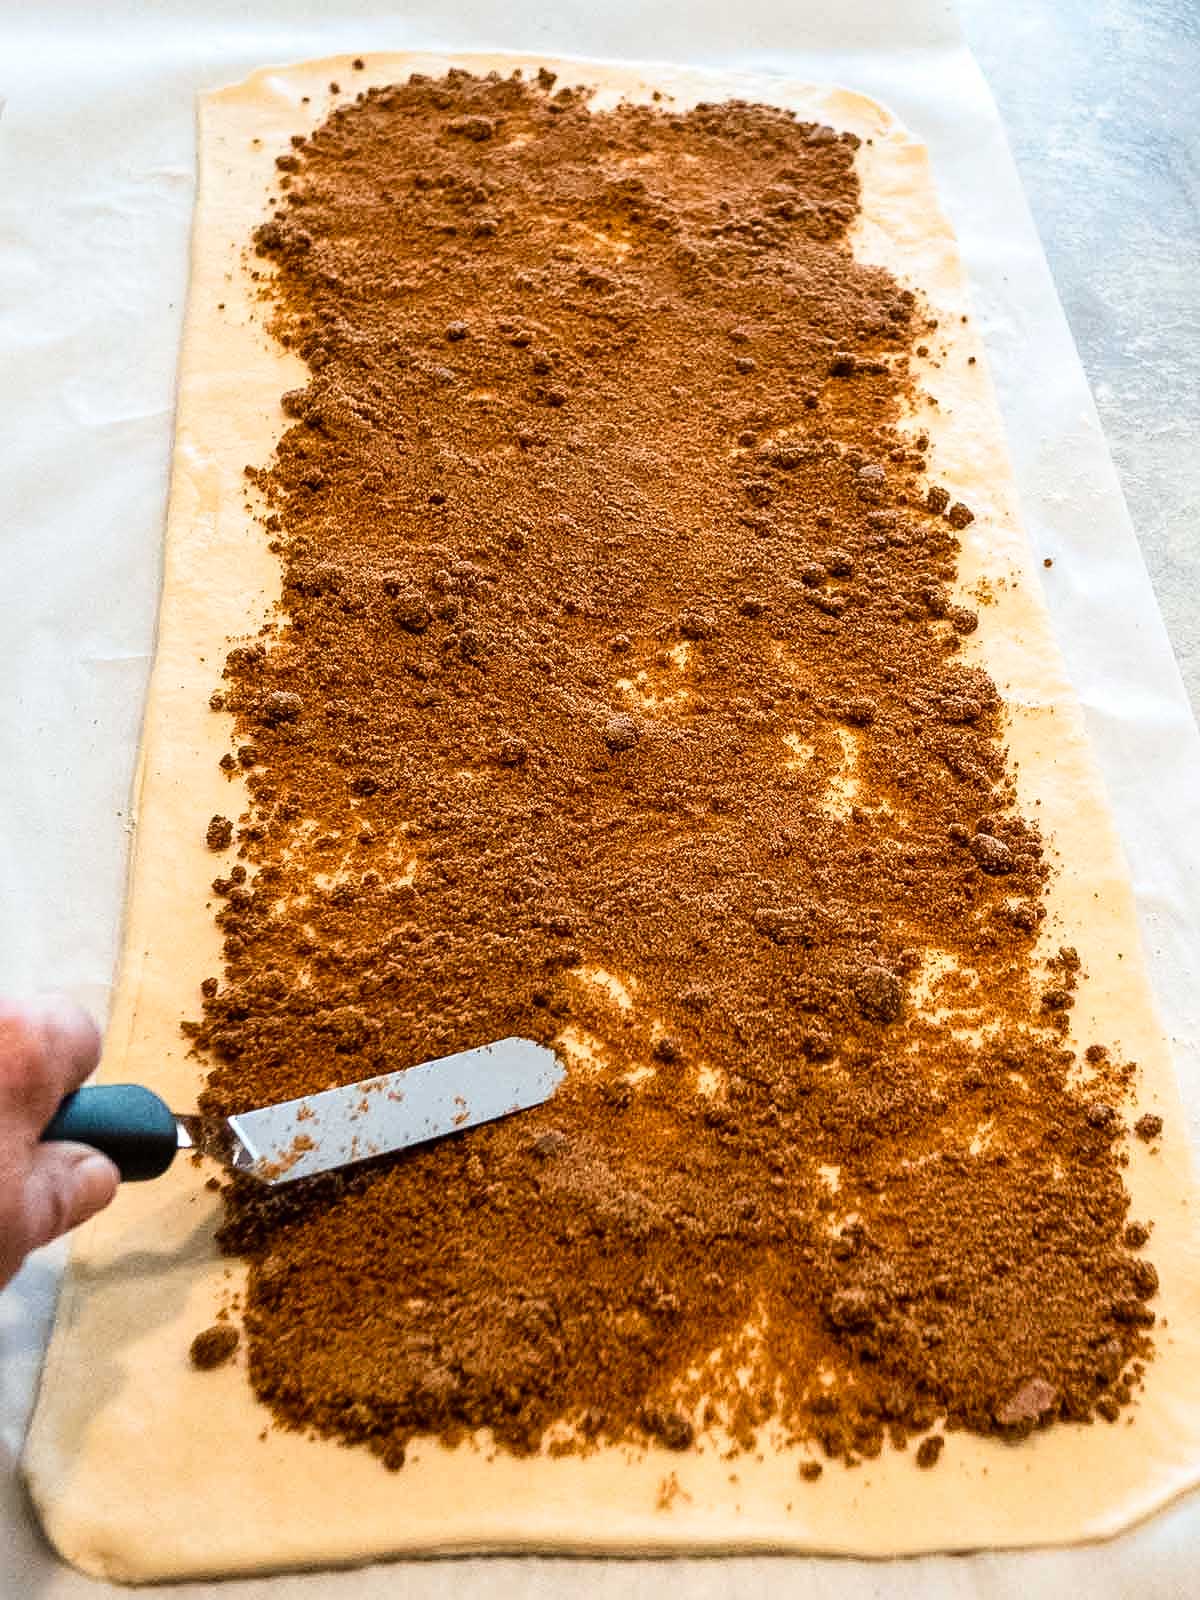 Spreading the Cinnamon filling on the dough.